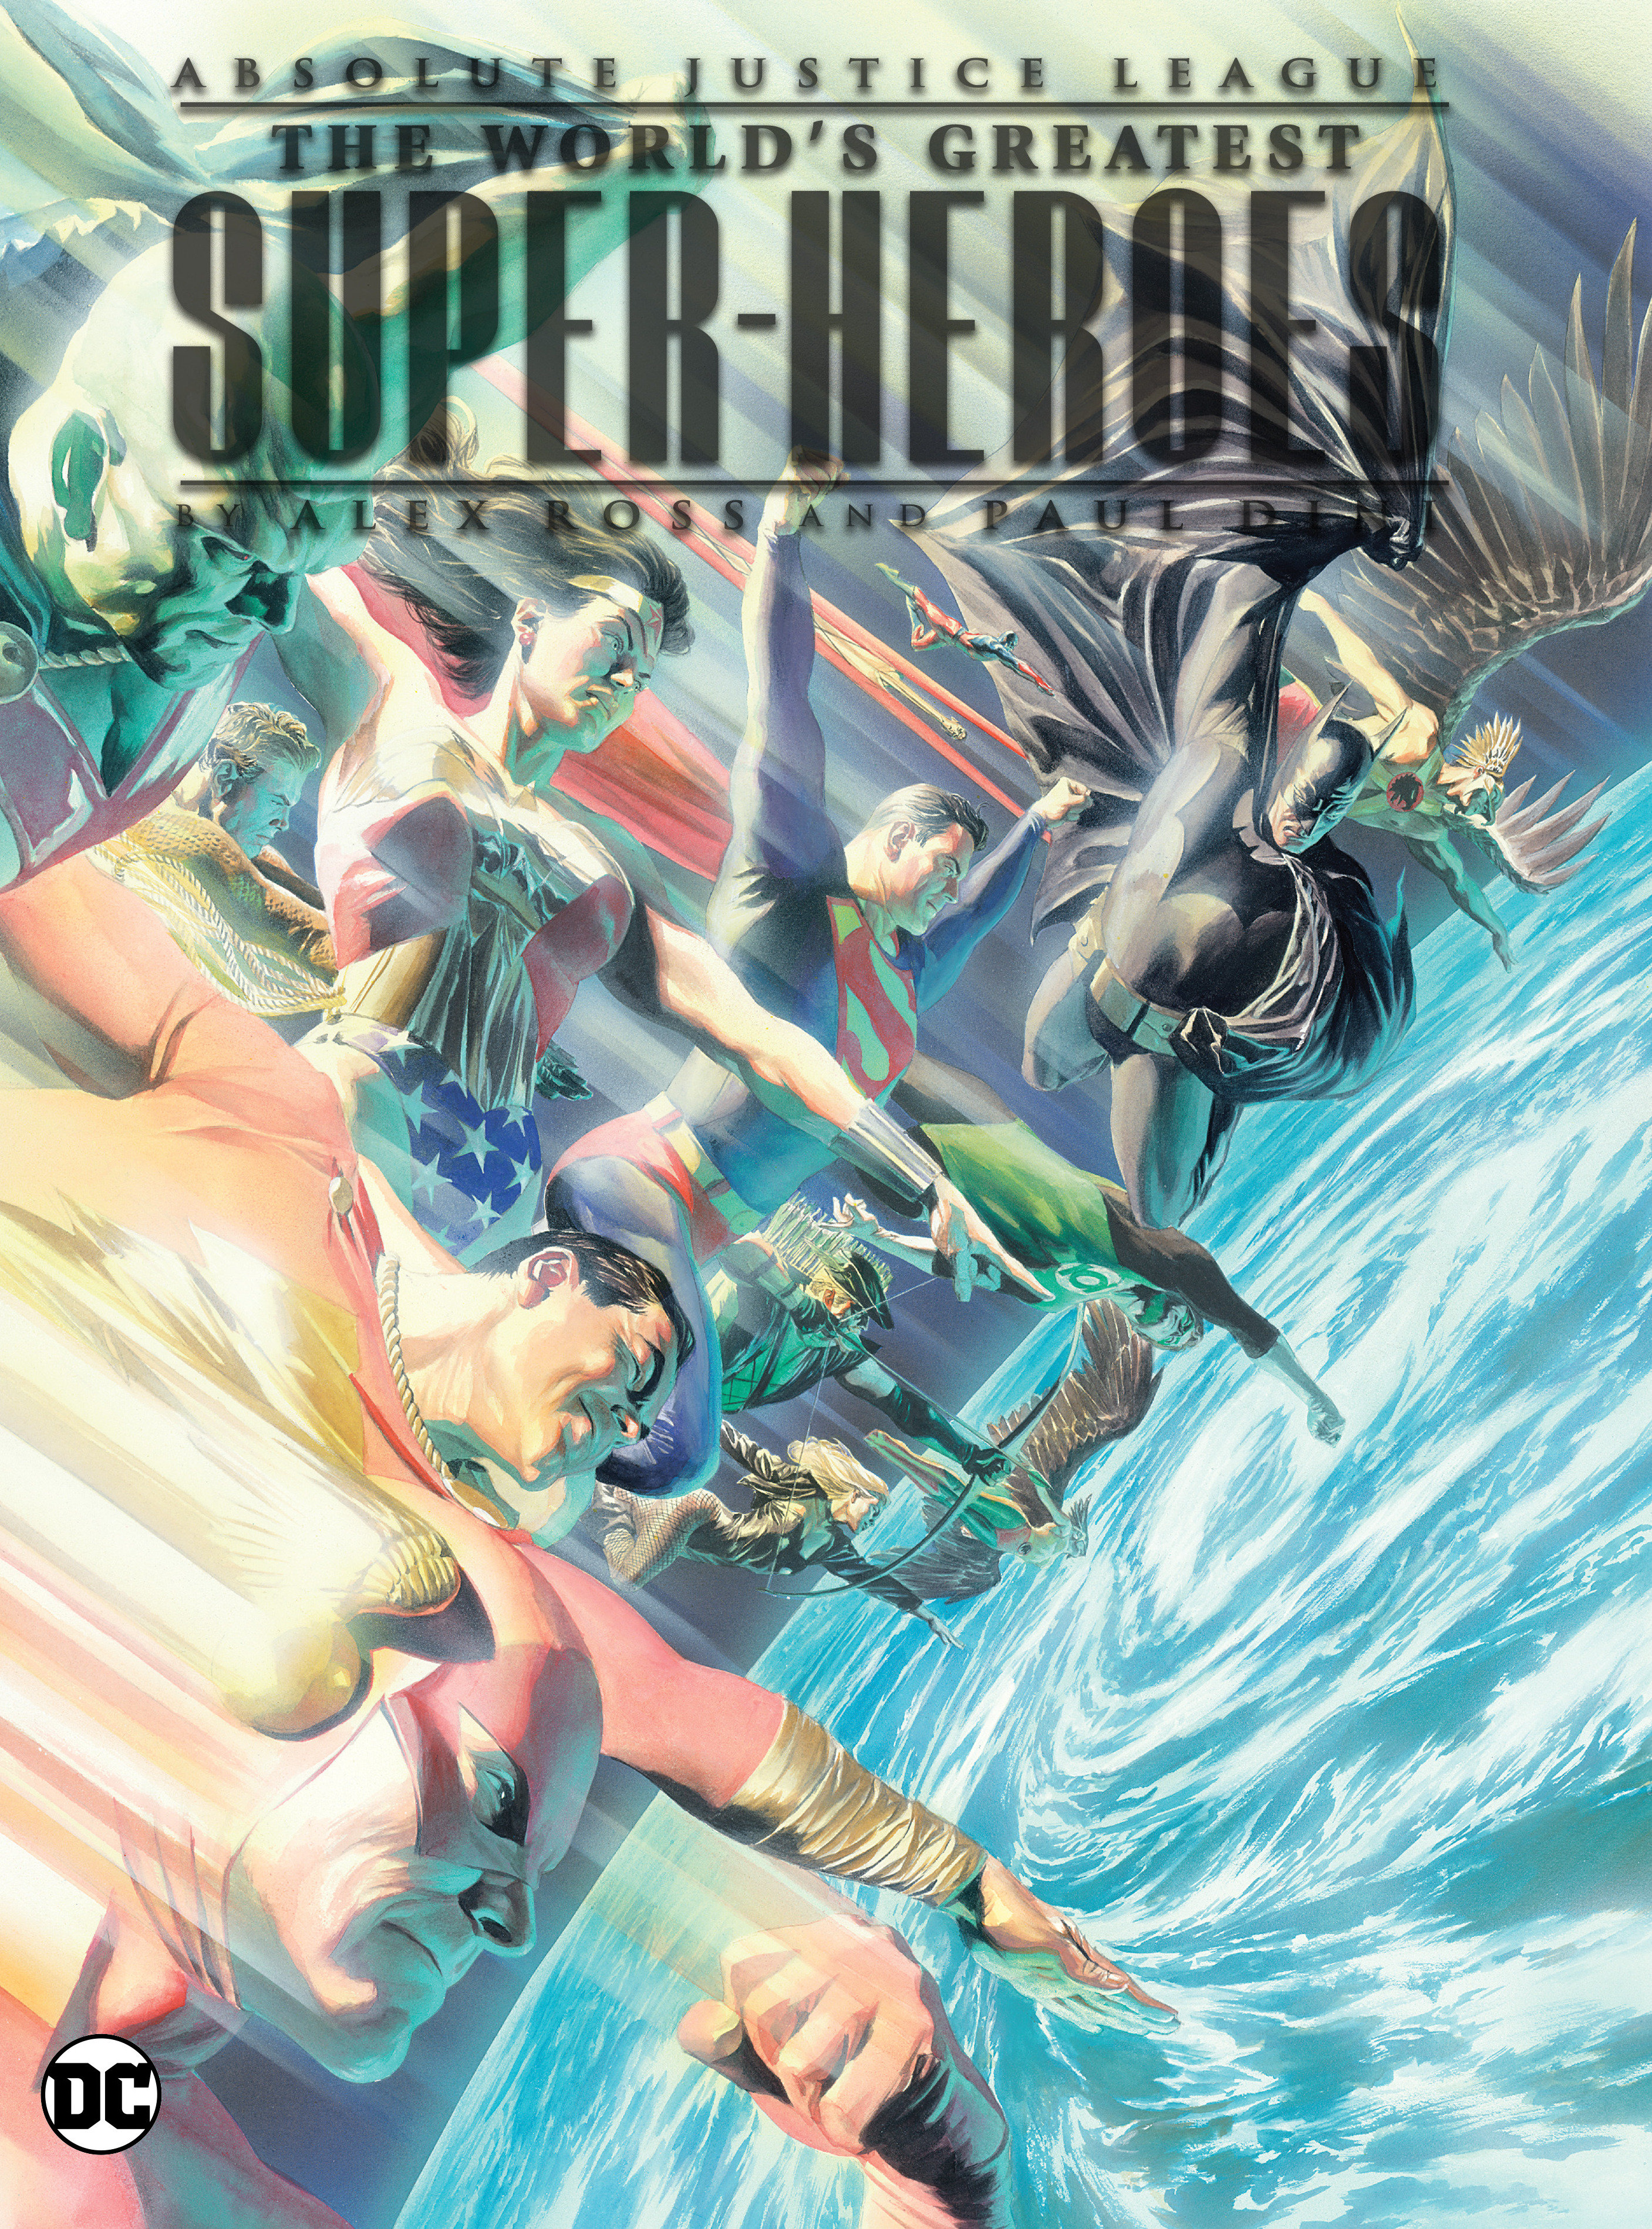 Absolute Justice League: The Worlds Greatest Super-Heroes by Alex Ross & Paul Dini Hardcover (2024 Edition)